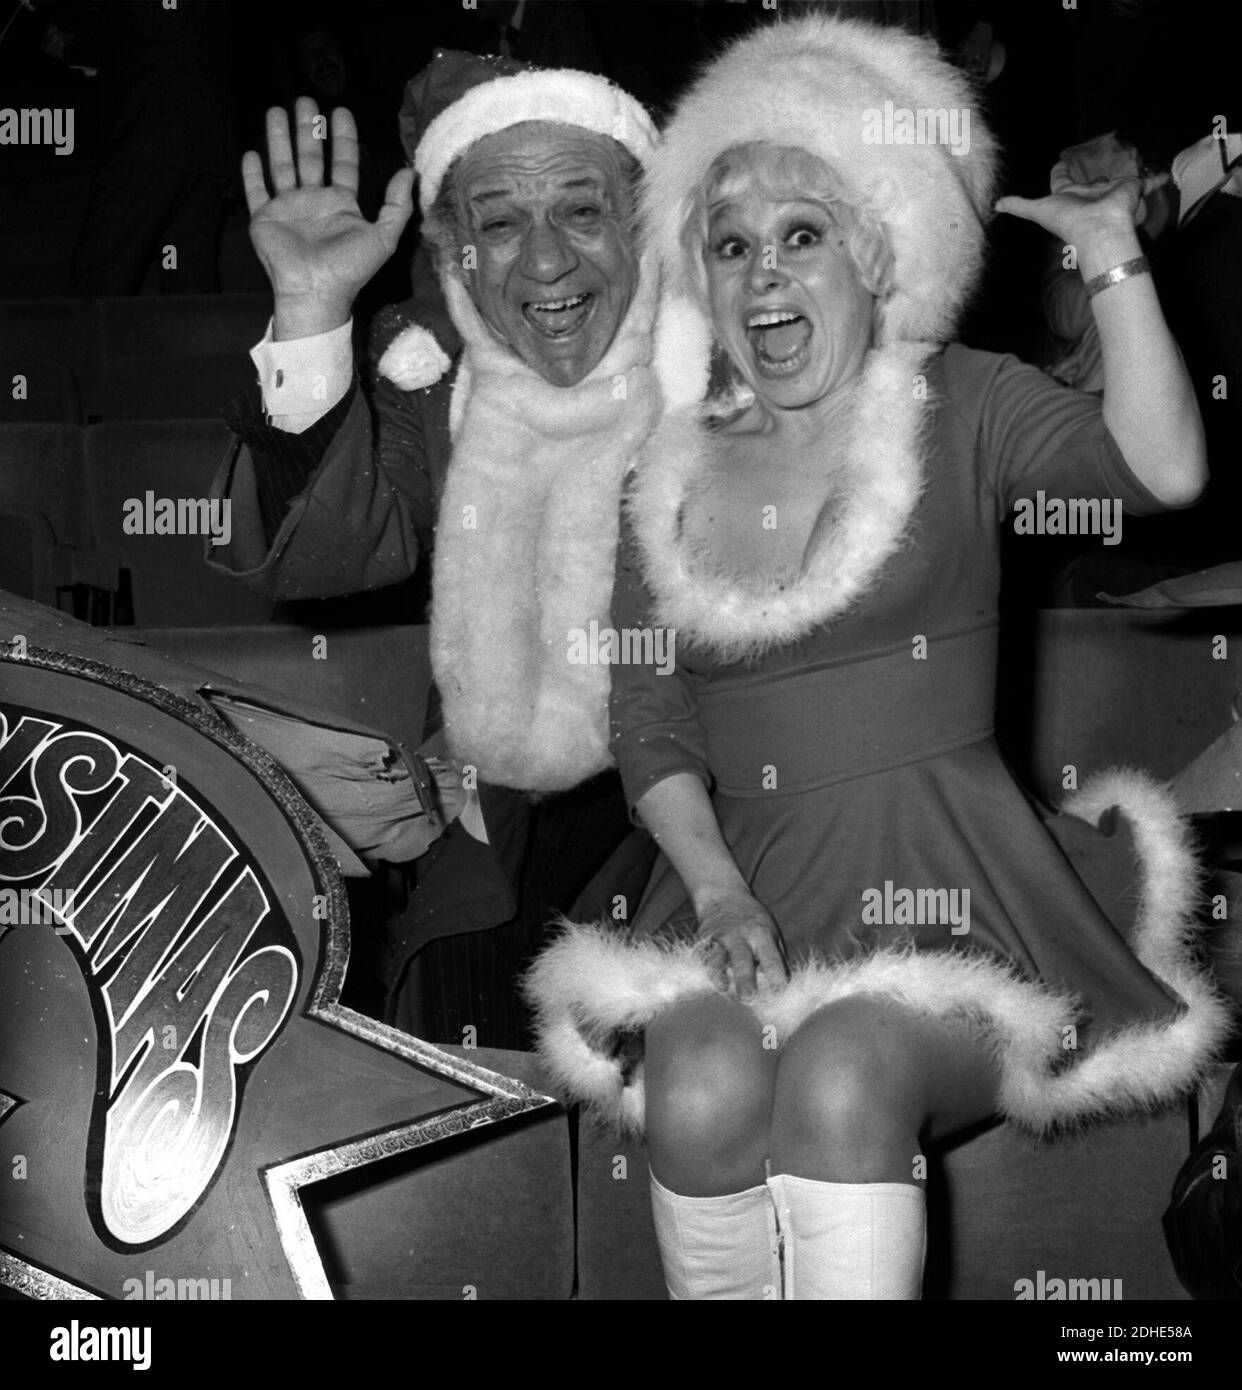 File photo dated 12/12/73 of Carry On stars Sid James and Barbara Windsor welcoming guests to a party for ITV's Christmas performers at the New London Theatre. The much-loved entertainer, best known for her roles in EastEnders and the Carry On films, has died aged 83. Stock Photo